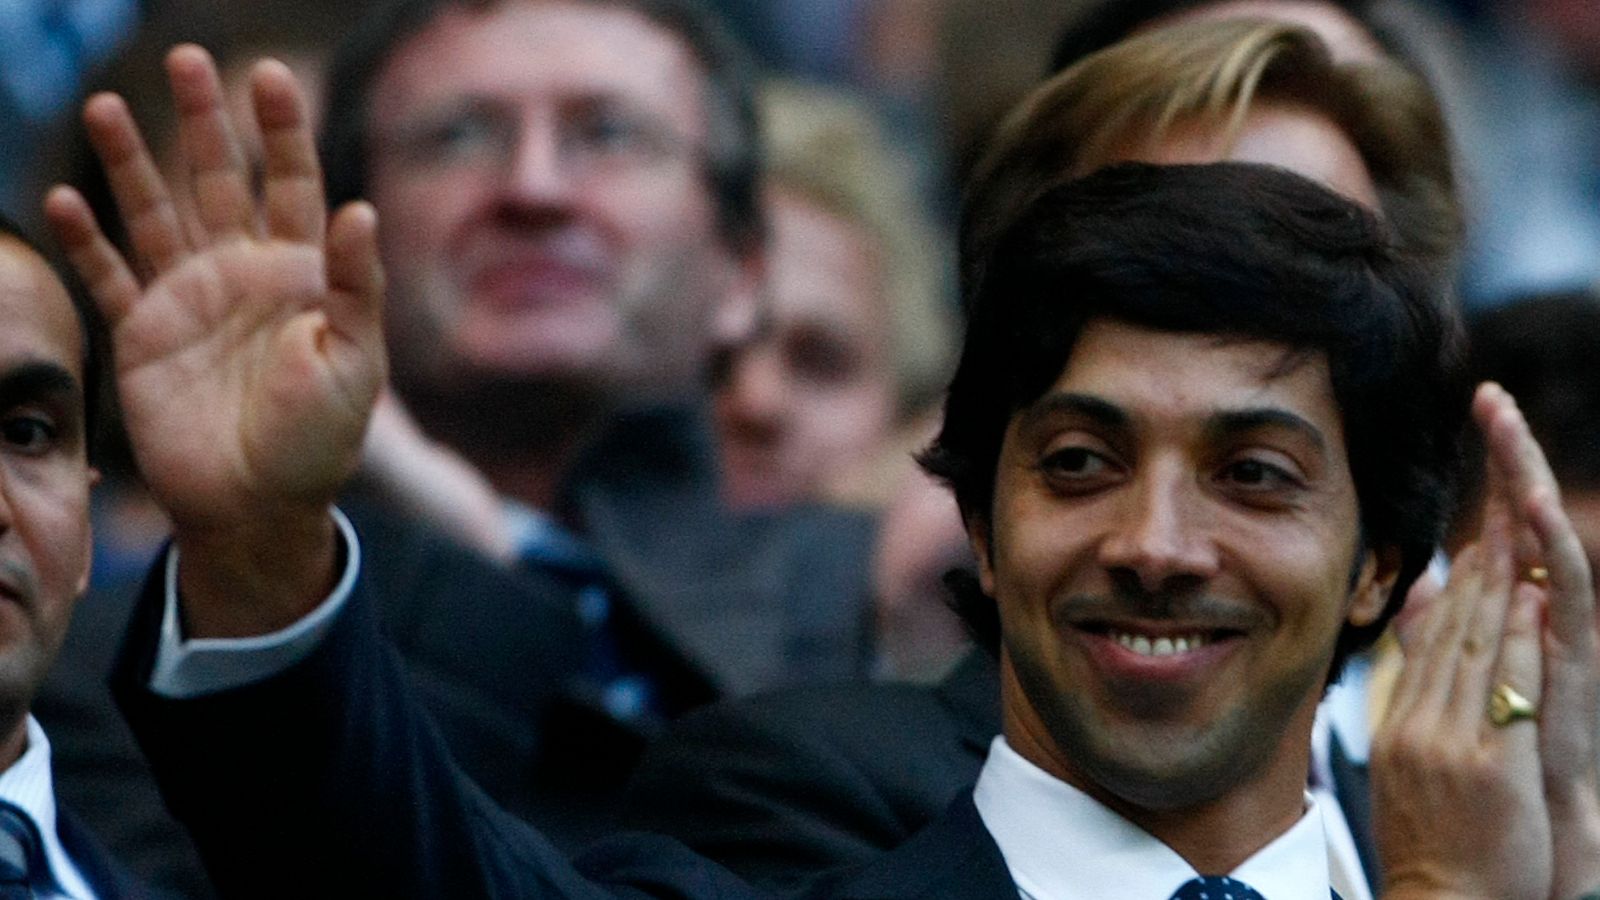 Champions League final Manchester City owner Sheikh Mansour to pay for